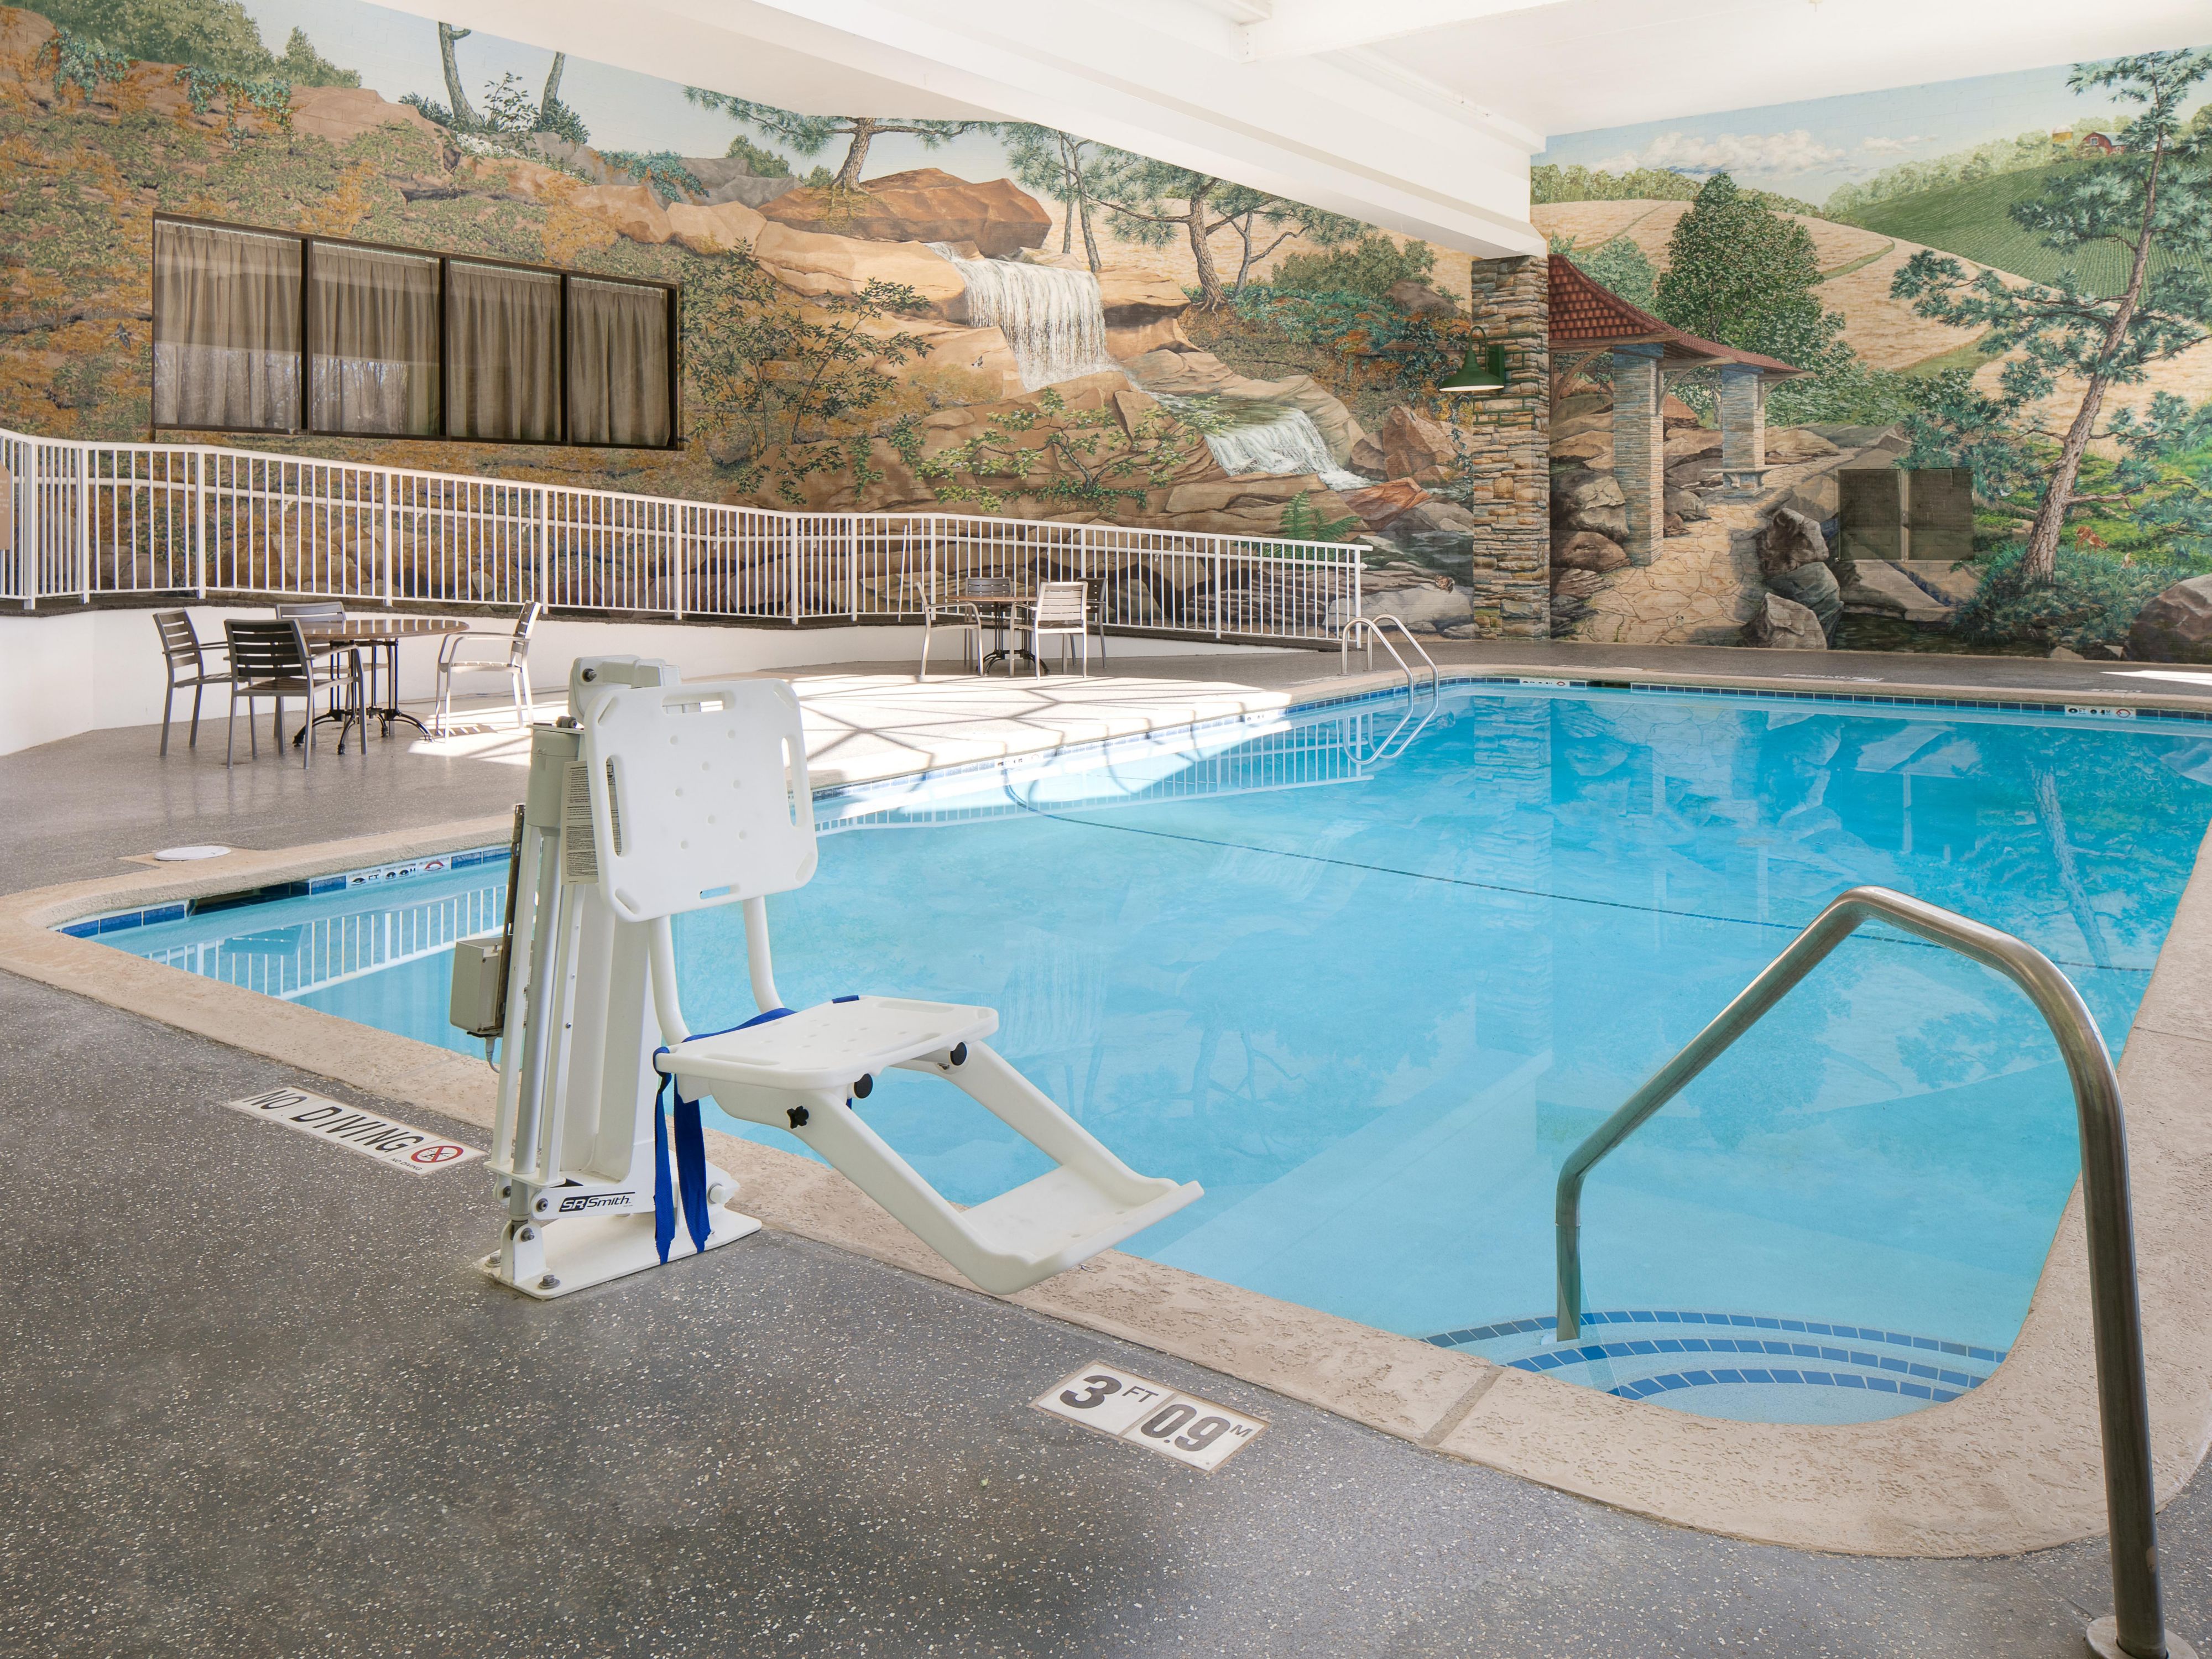 End your day with a refreshing dip in the hotel's pool.  The pool area features an indoor patio along with an outdoor open air patio. The perfect spot to relax and unwind after working or sightseeing the great Des Moines area attractions.  